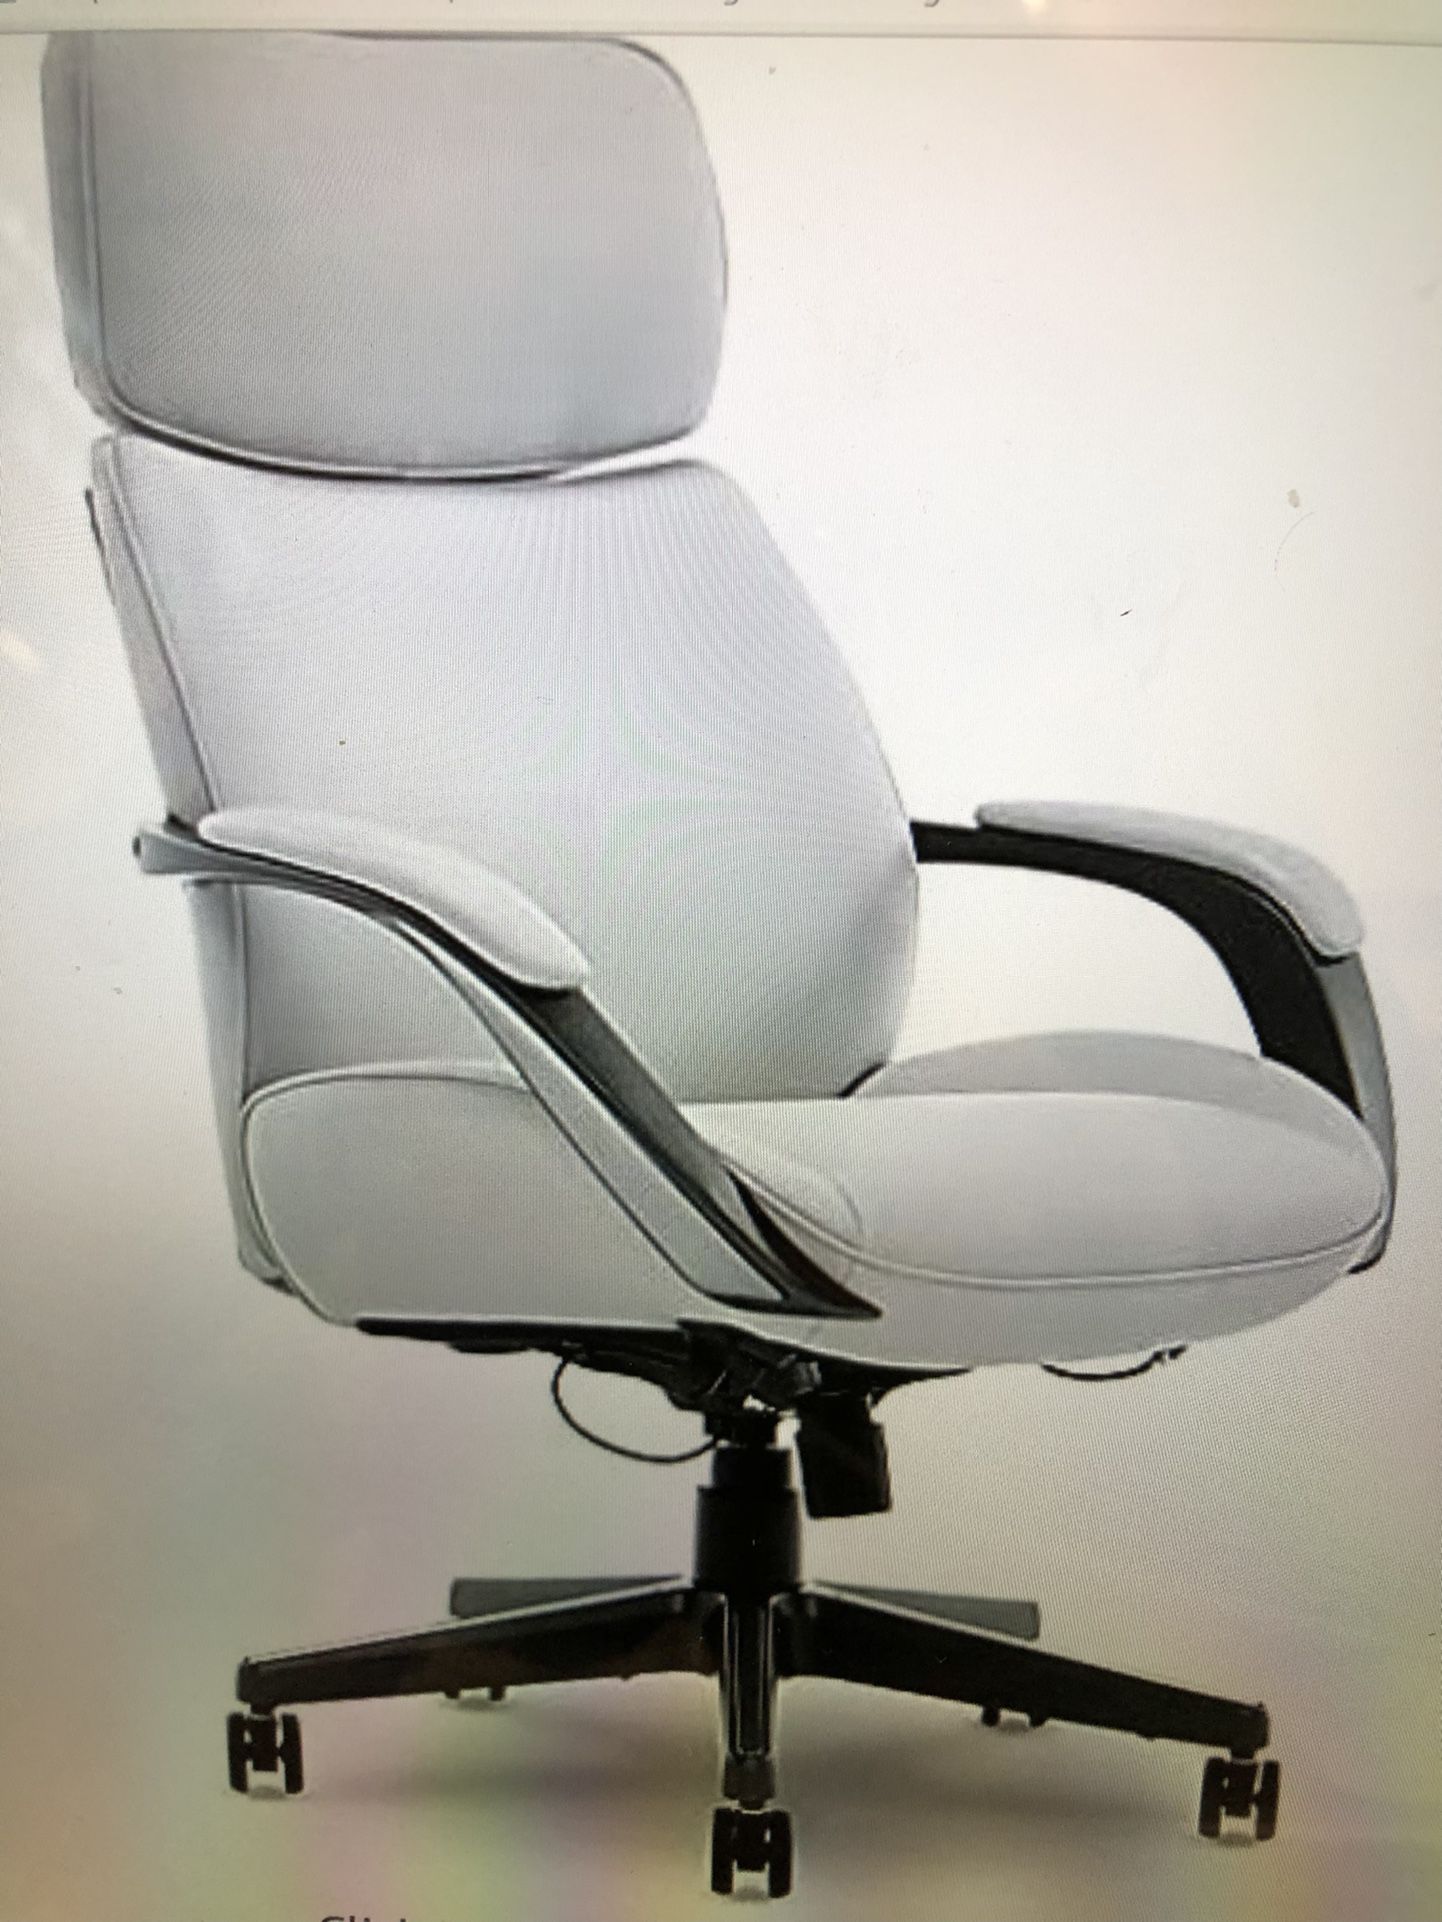 Beauty rest Bonded Leather Executive Office Desk Chair 2 Chairs Available $125 Each